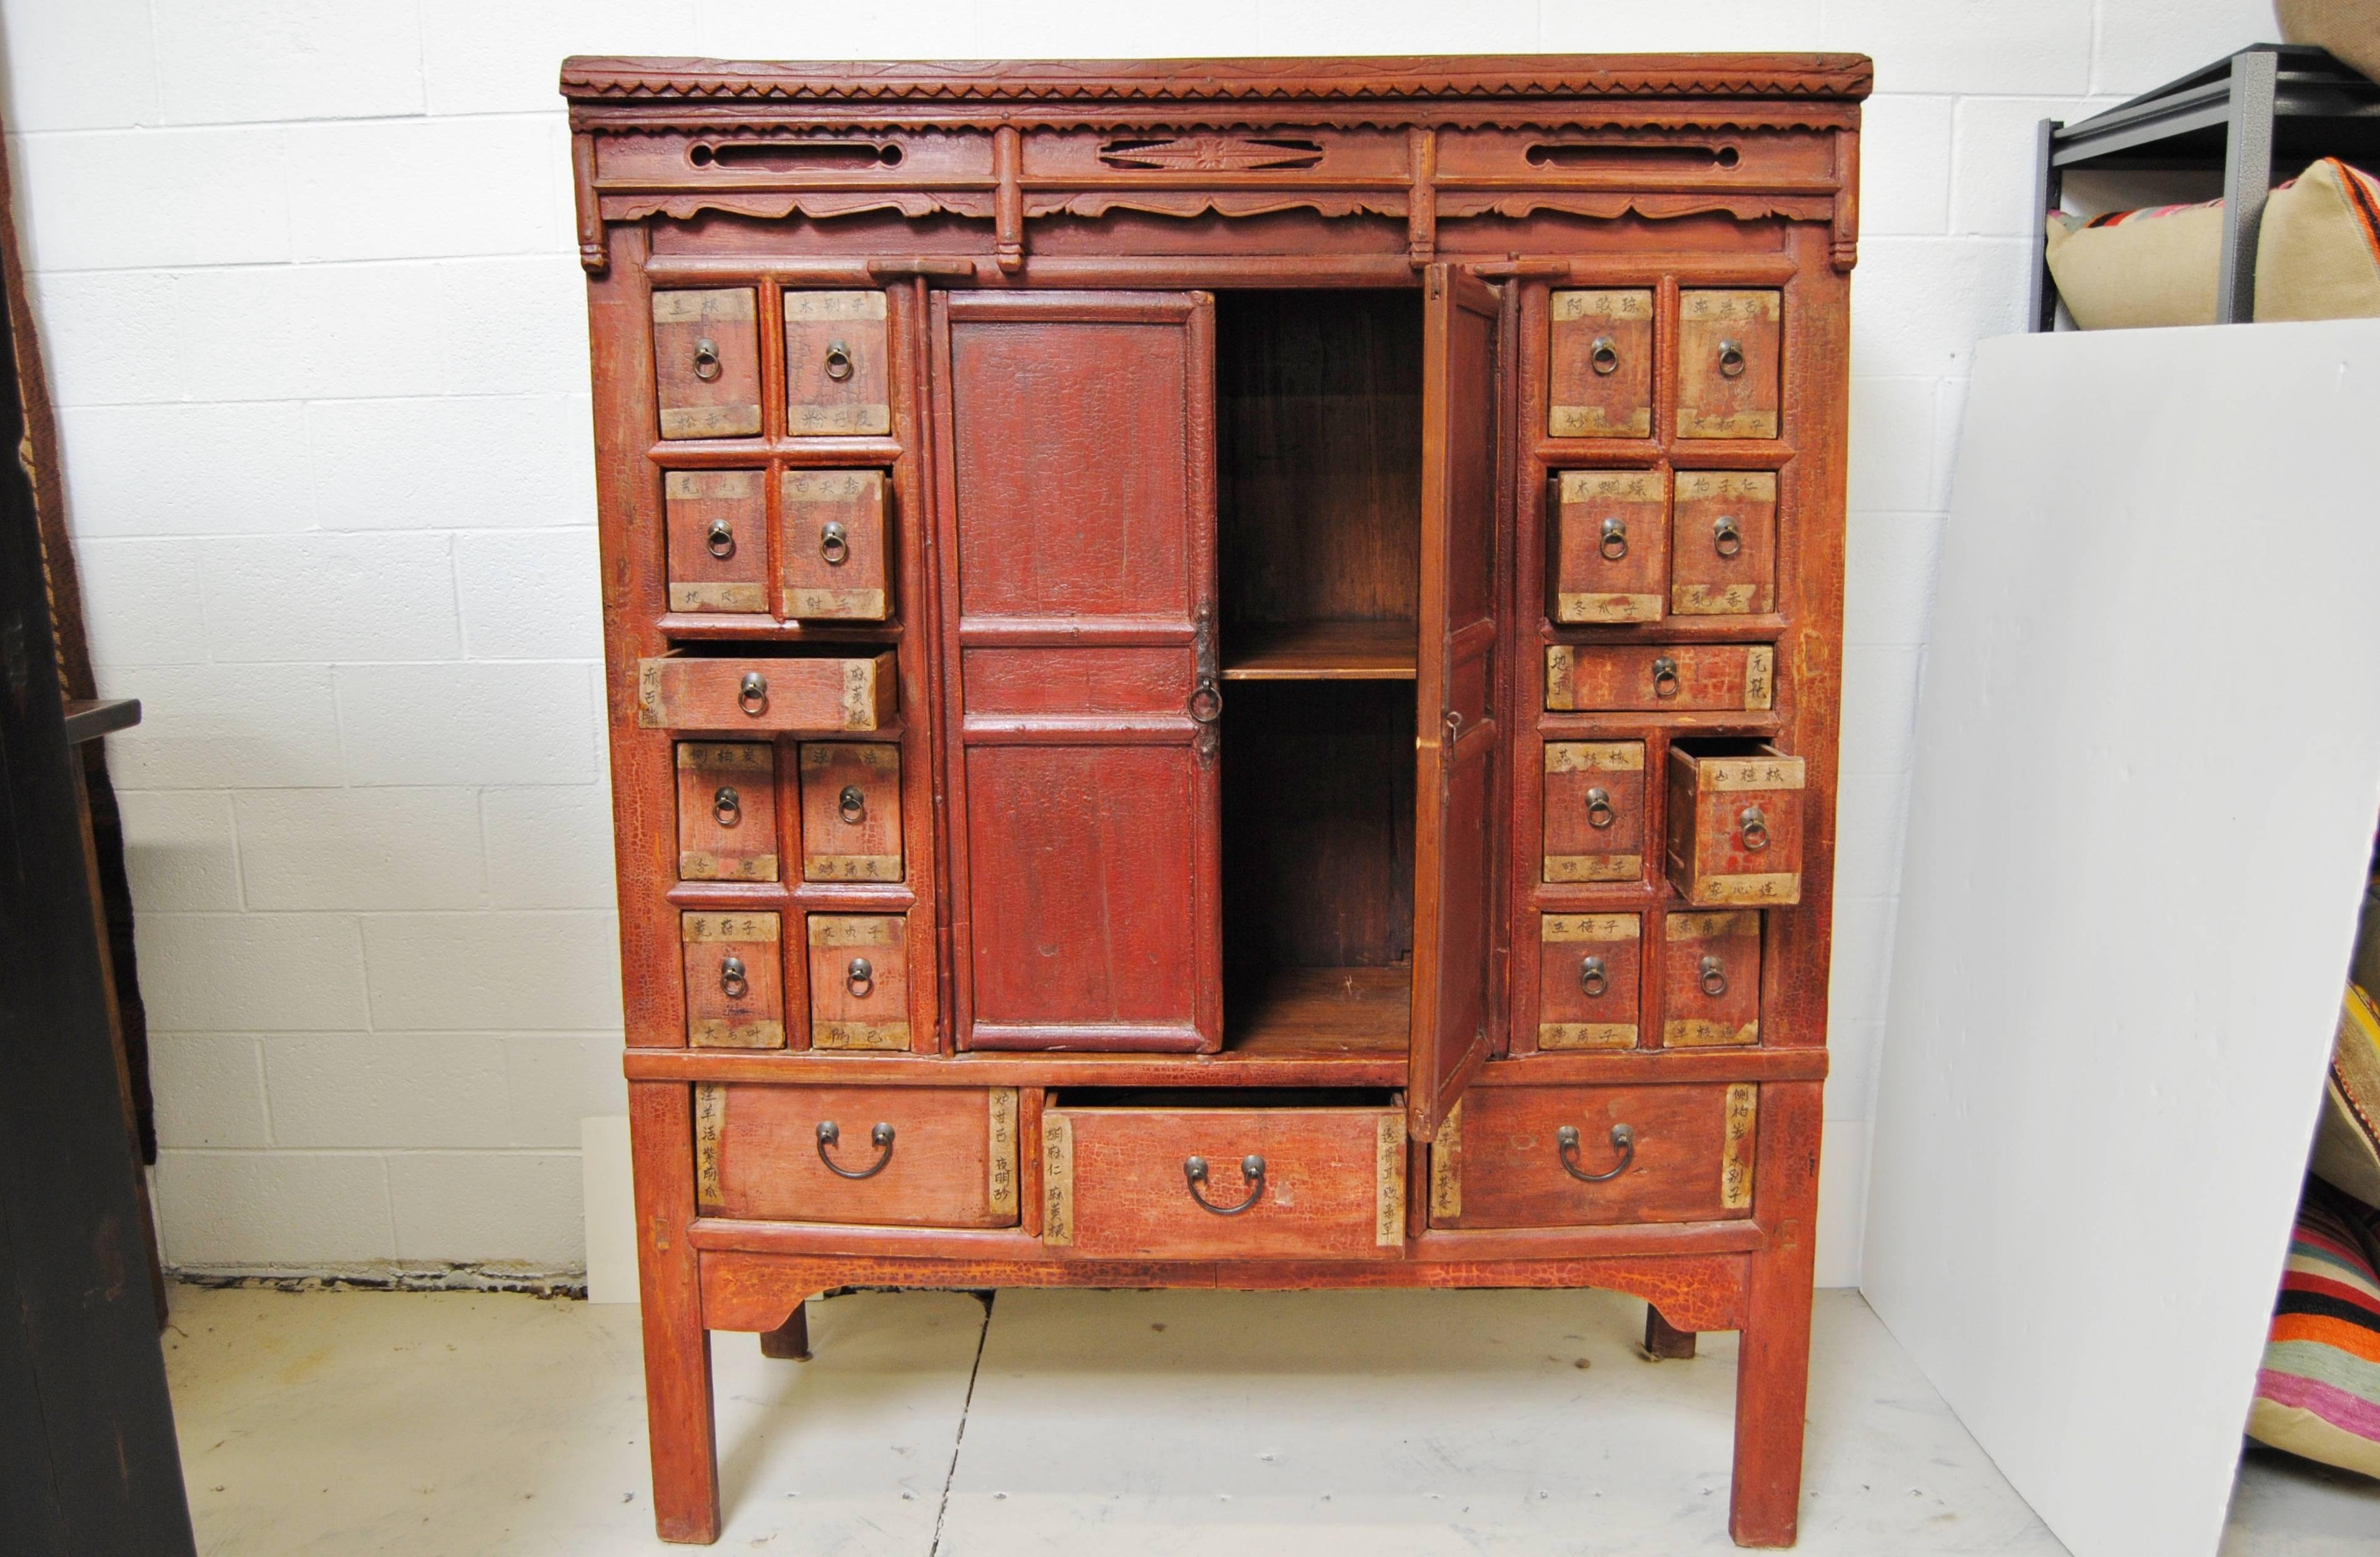 Antique Chinese elmwood apothecary armoire with 21 drawers and a pair of center doors that open to a large storage area. The Asian armoire has beautiful hand-carved detail typical of the older Shanxi cabinets. All original lacquer and paint.